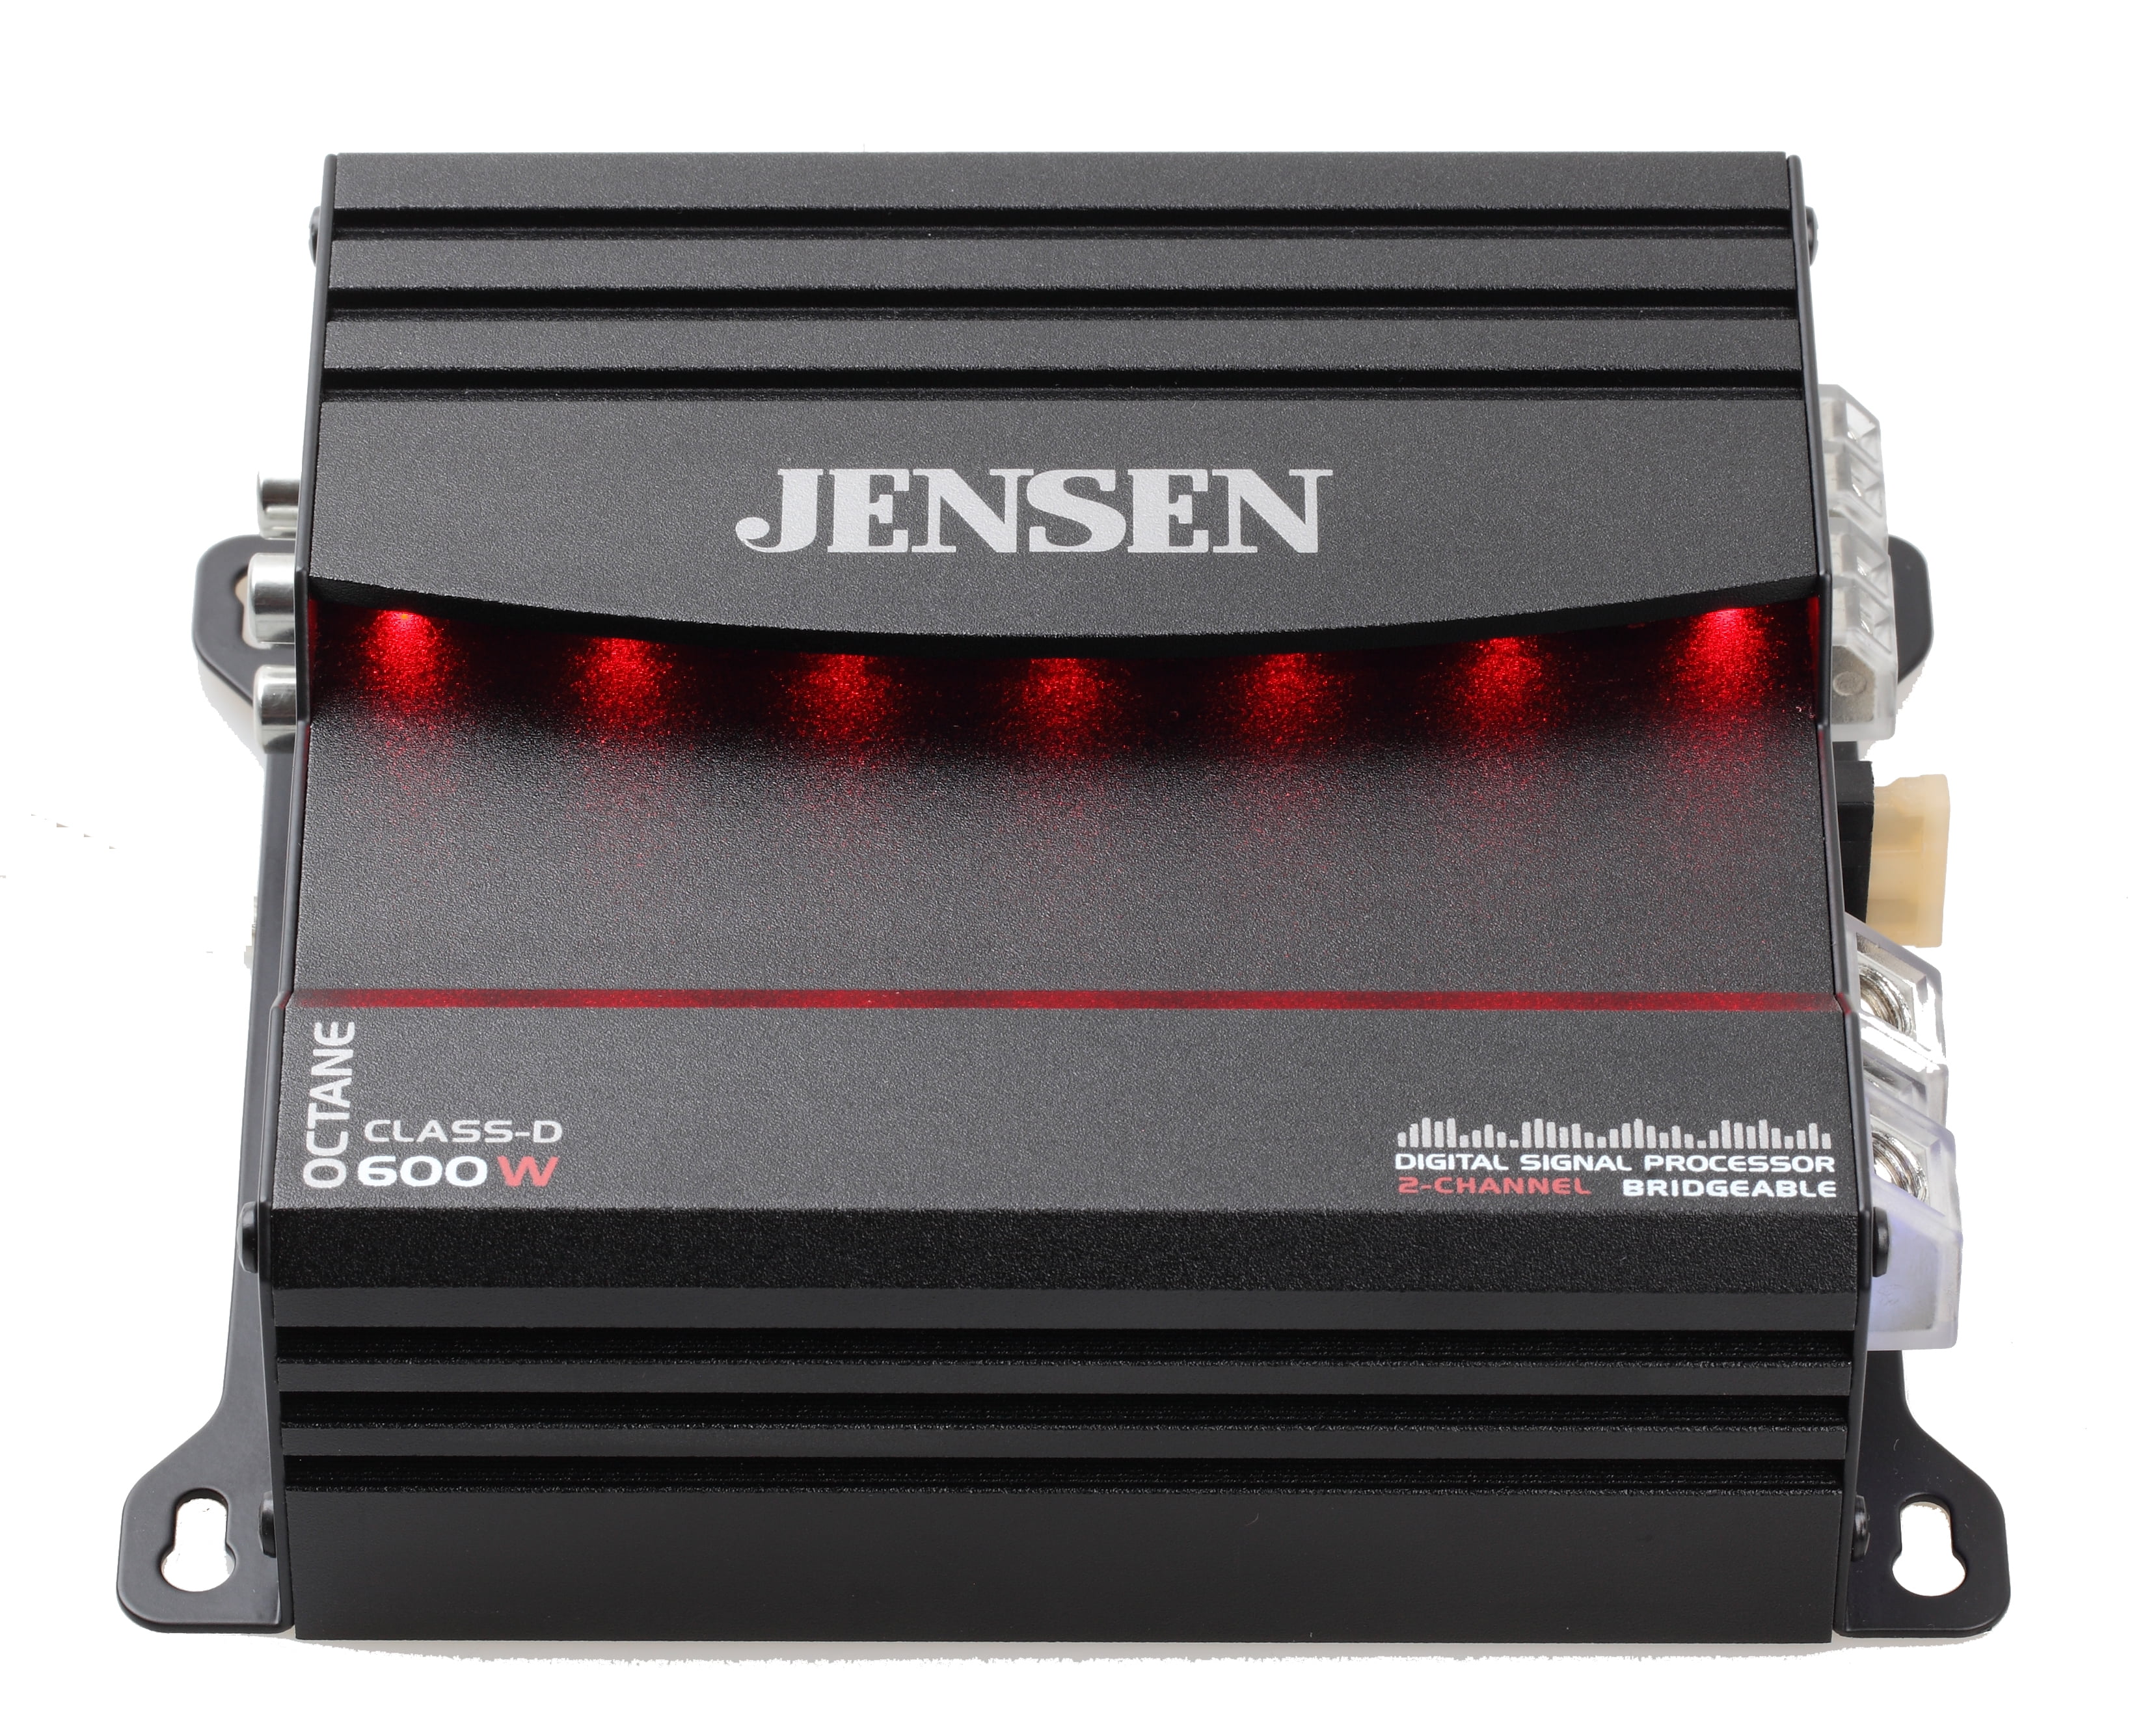 JENSEN XDA92RB Class D 2 Channel Bridgeable Amplifier with 80 Watts x 2 RMS and 600 Watts Peak Power and RGB Illumination & System Control via Bluetooth App, Black